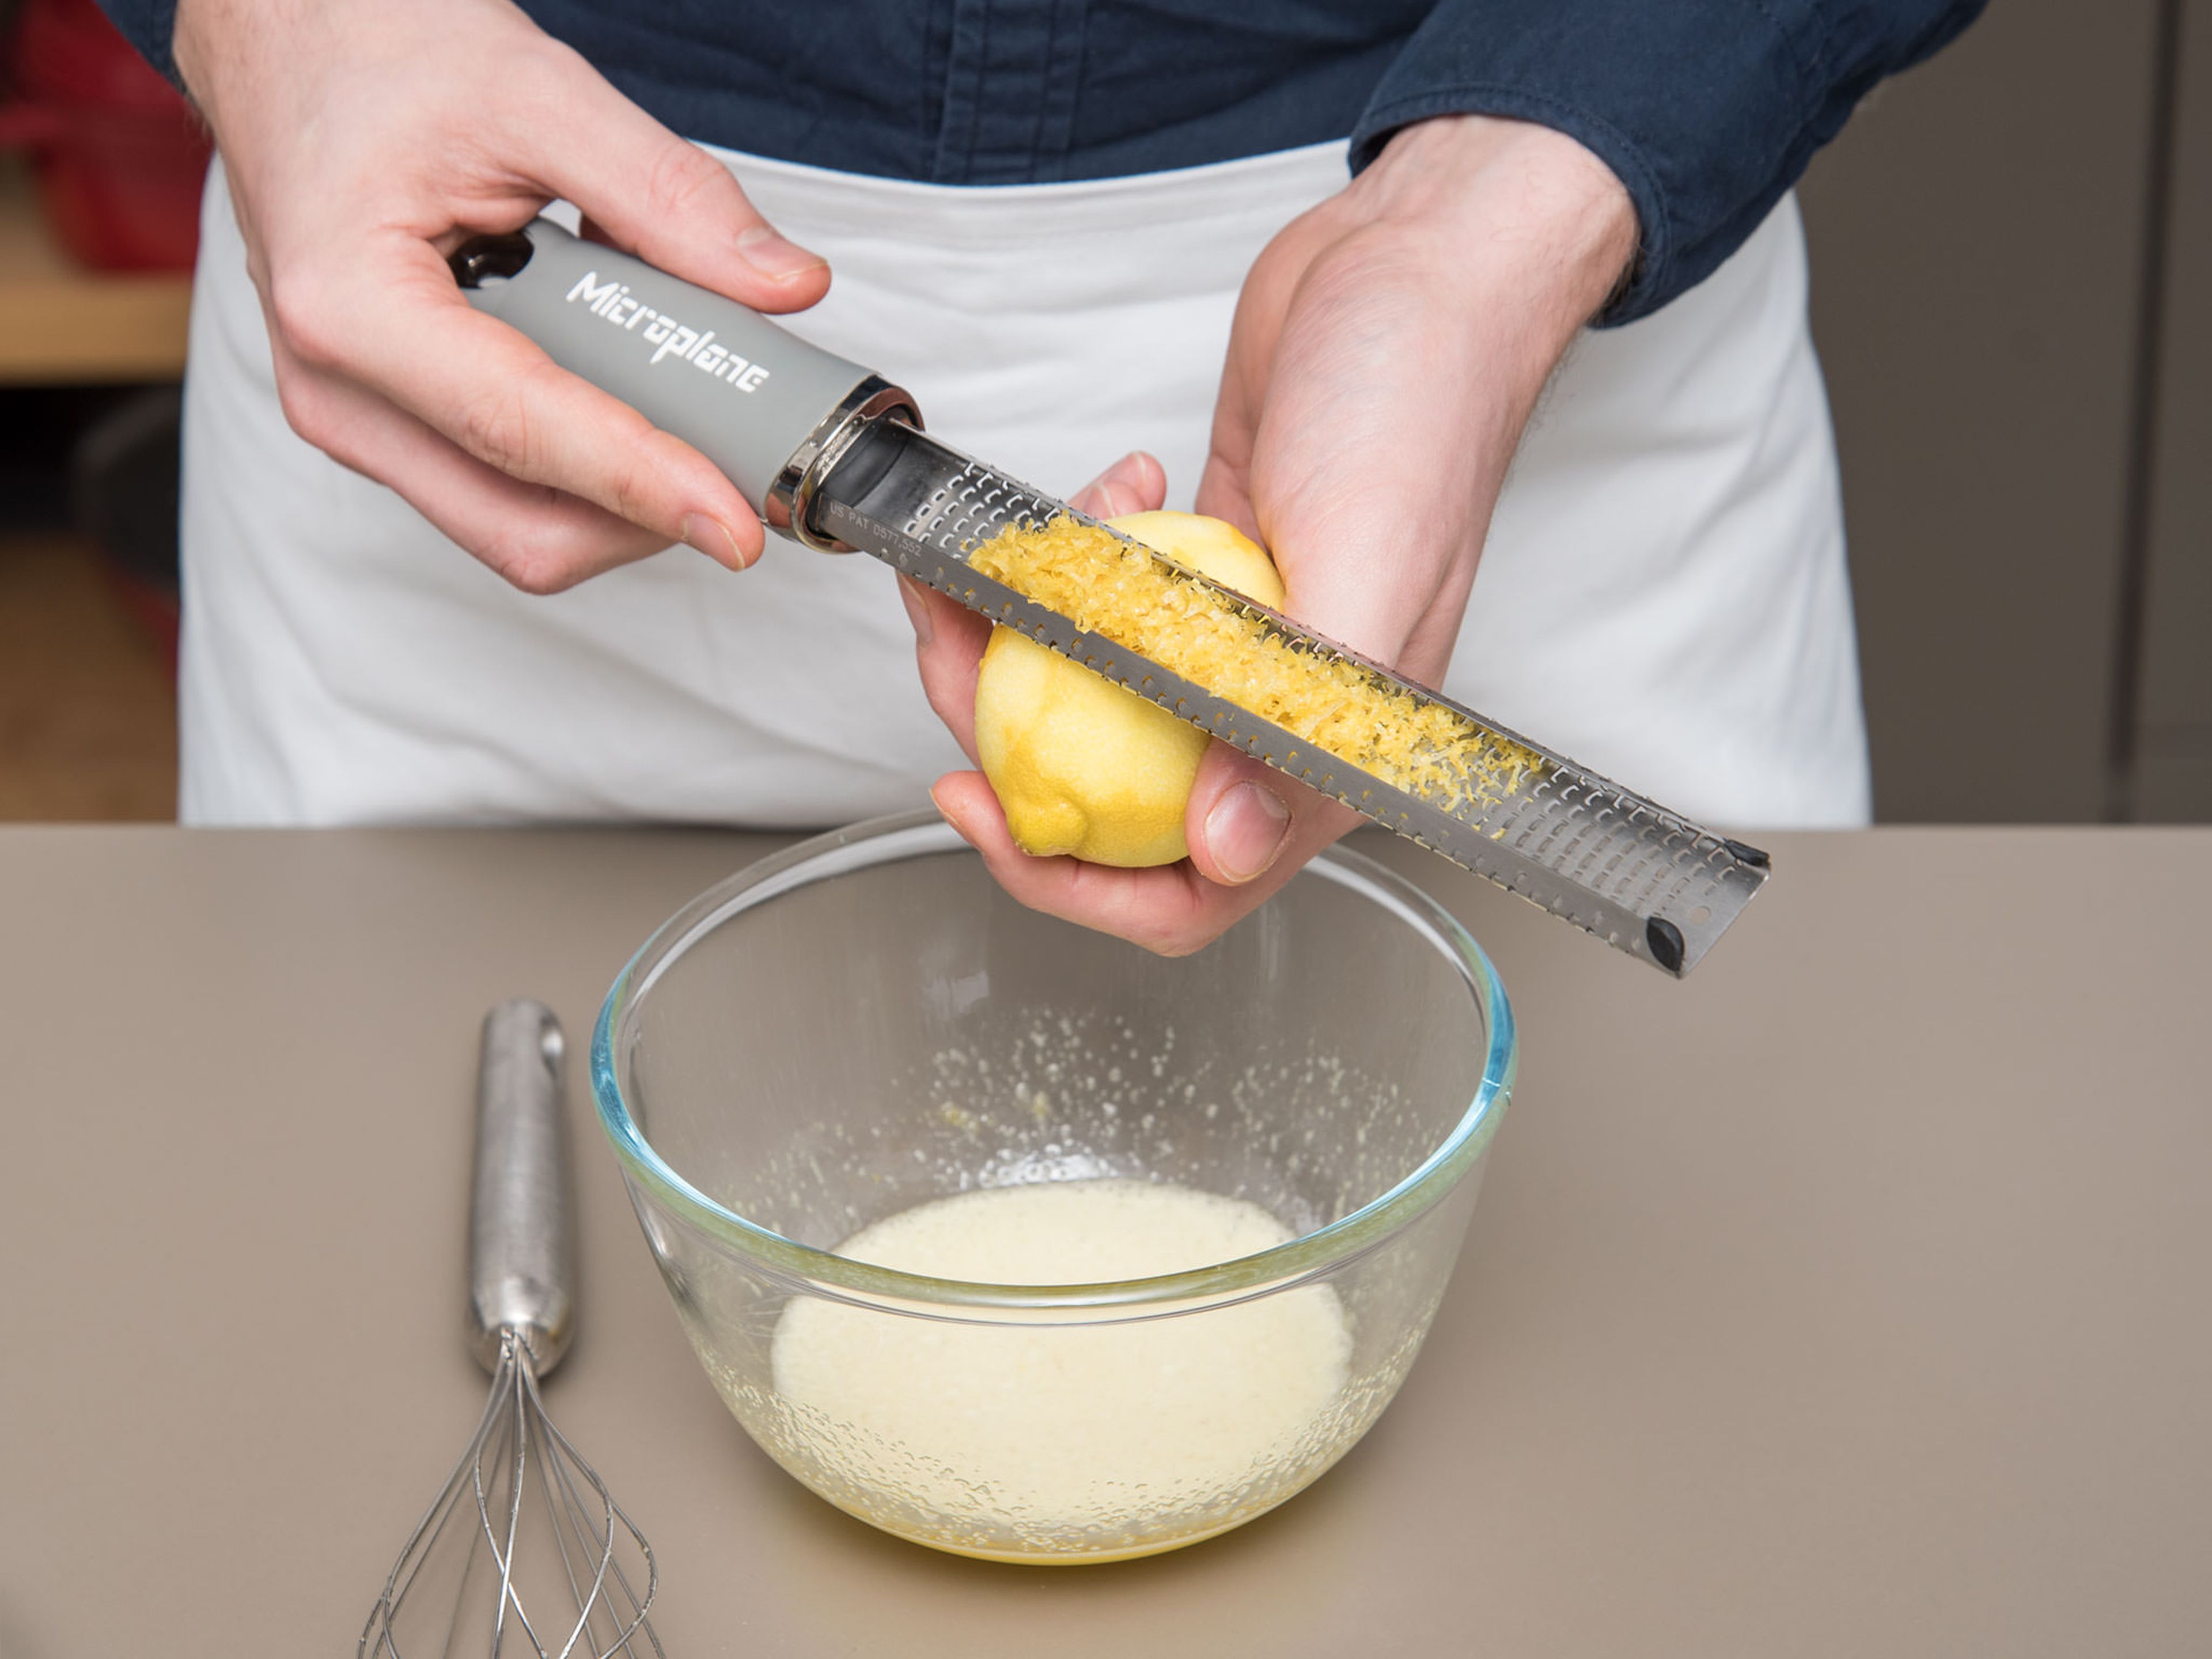 Add egg and sugar to a bowl and whisk until combined. Stir in honey and add lemon zest. Stir to combine until a smooth batter forms.